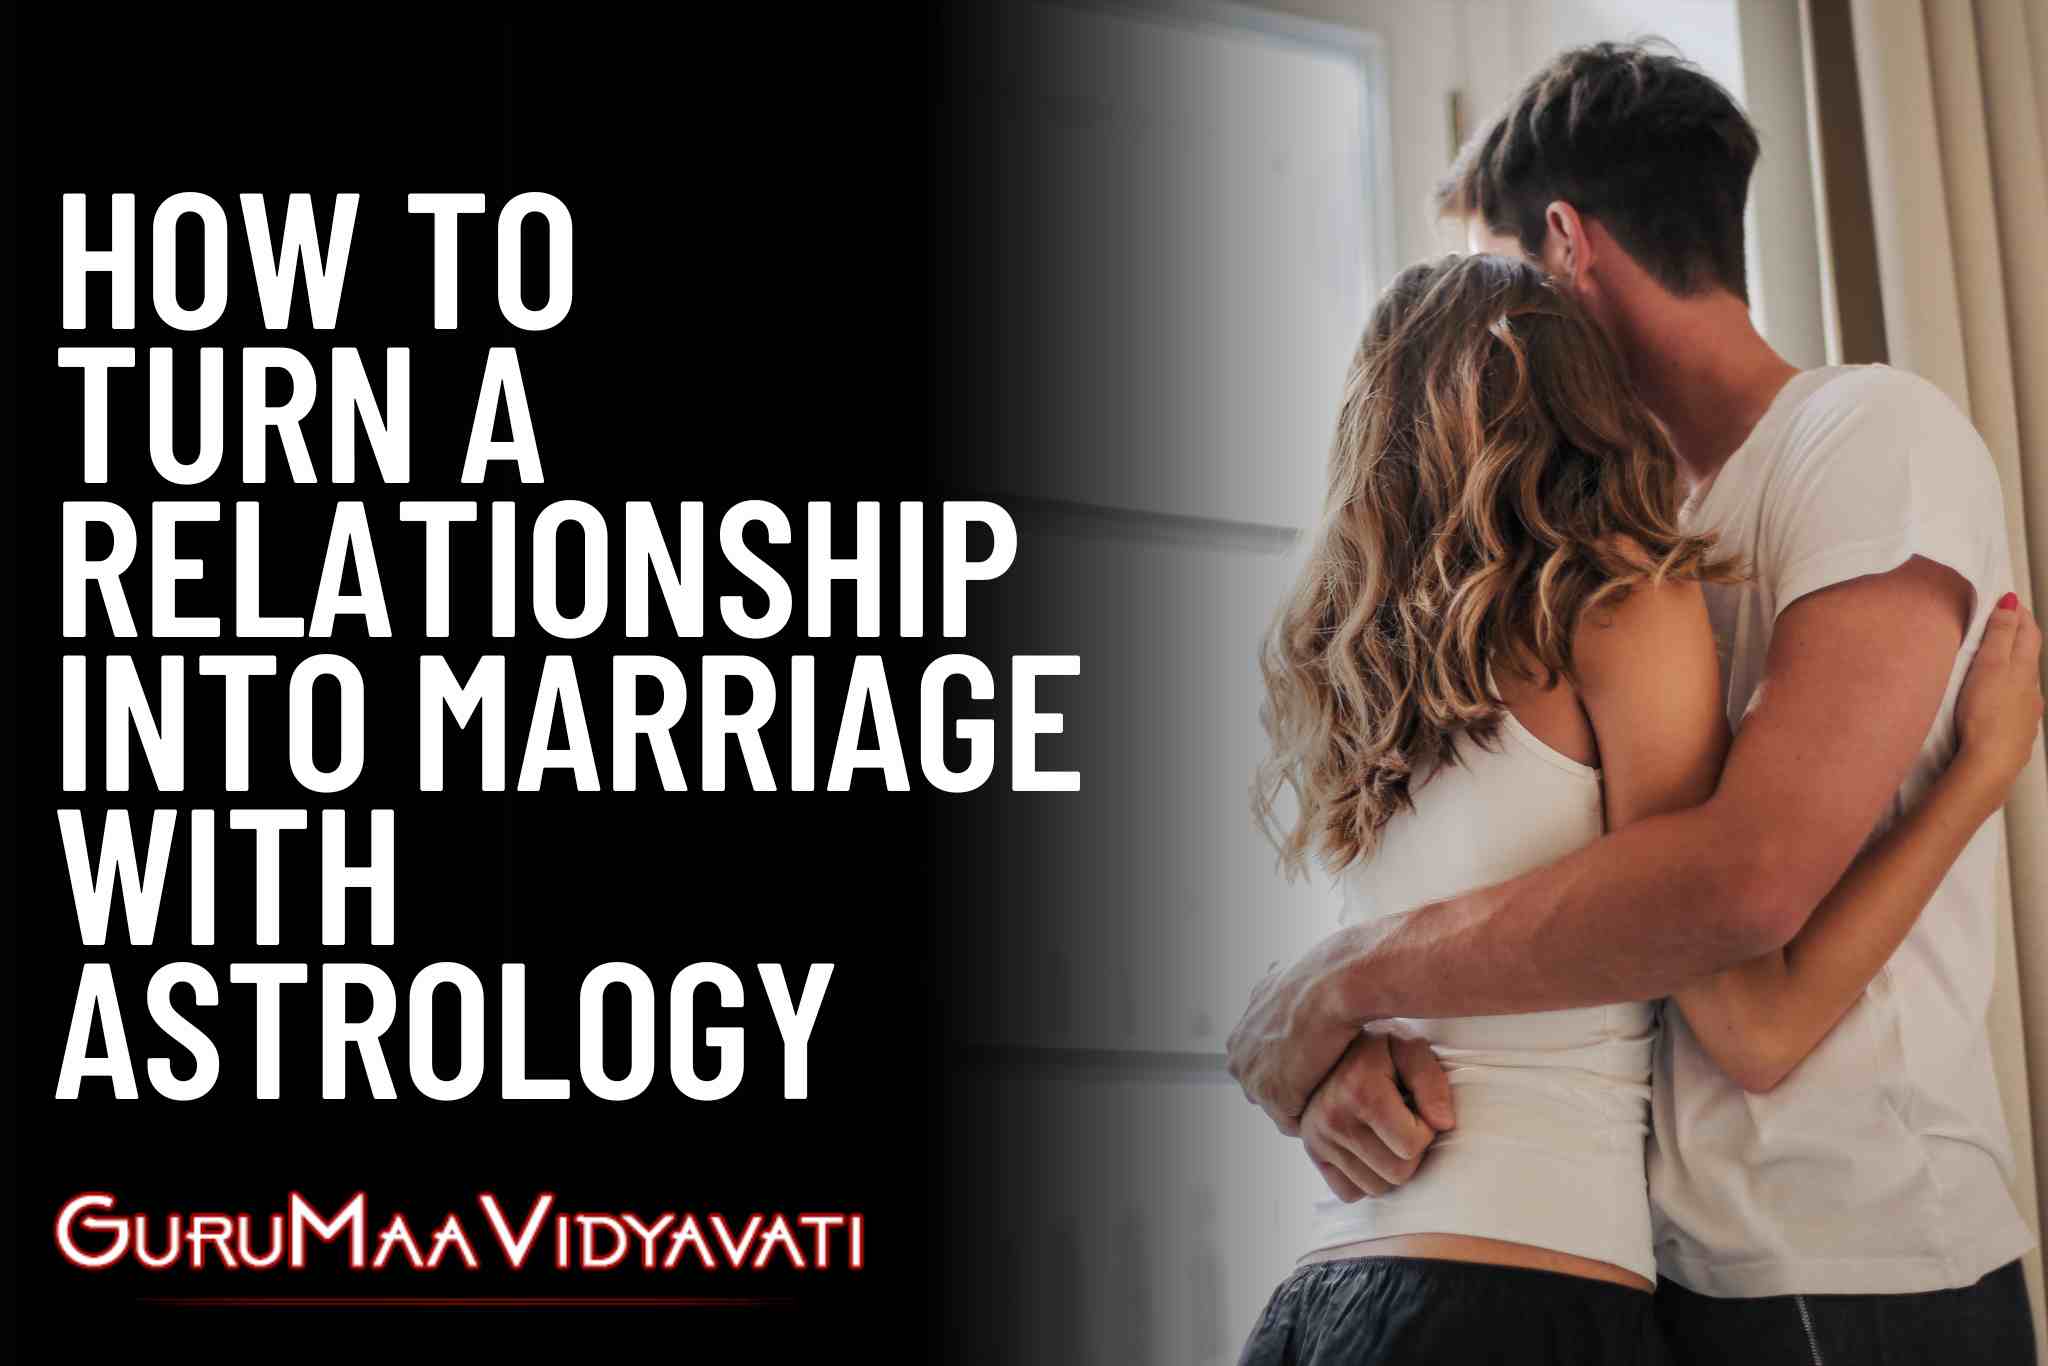 How to Turn a Relationship into Marriage with Astrology